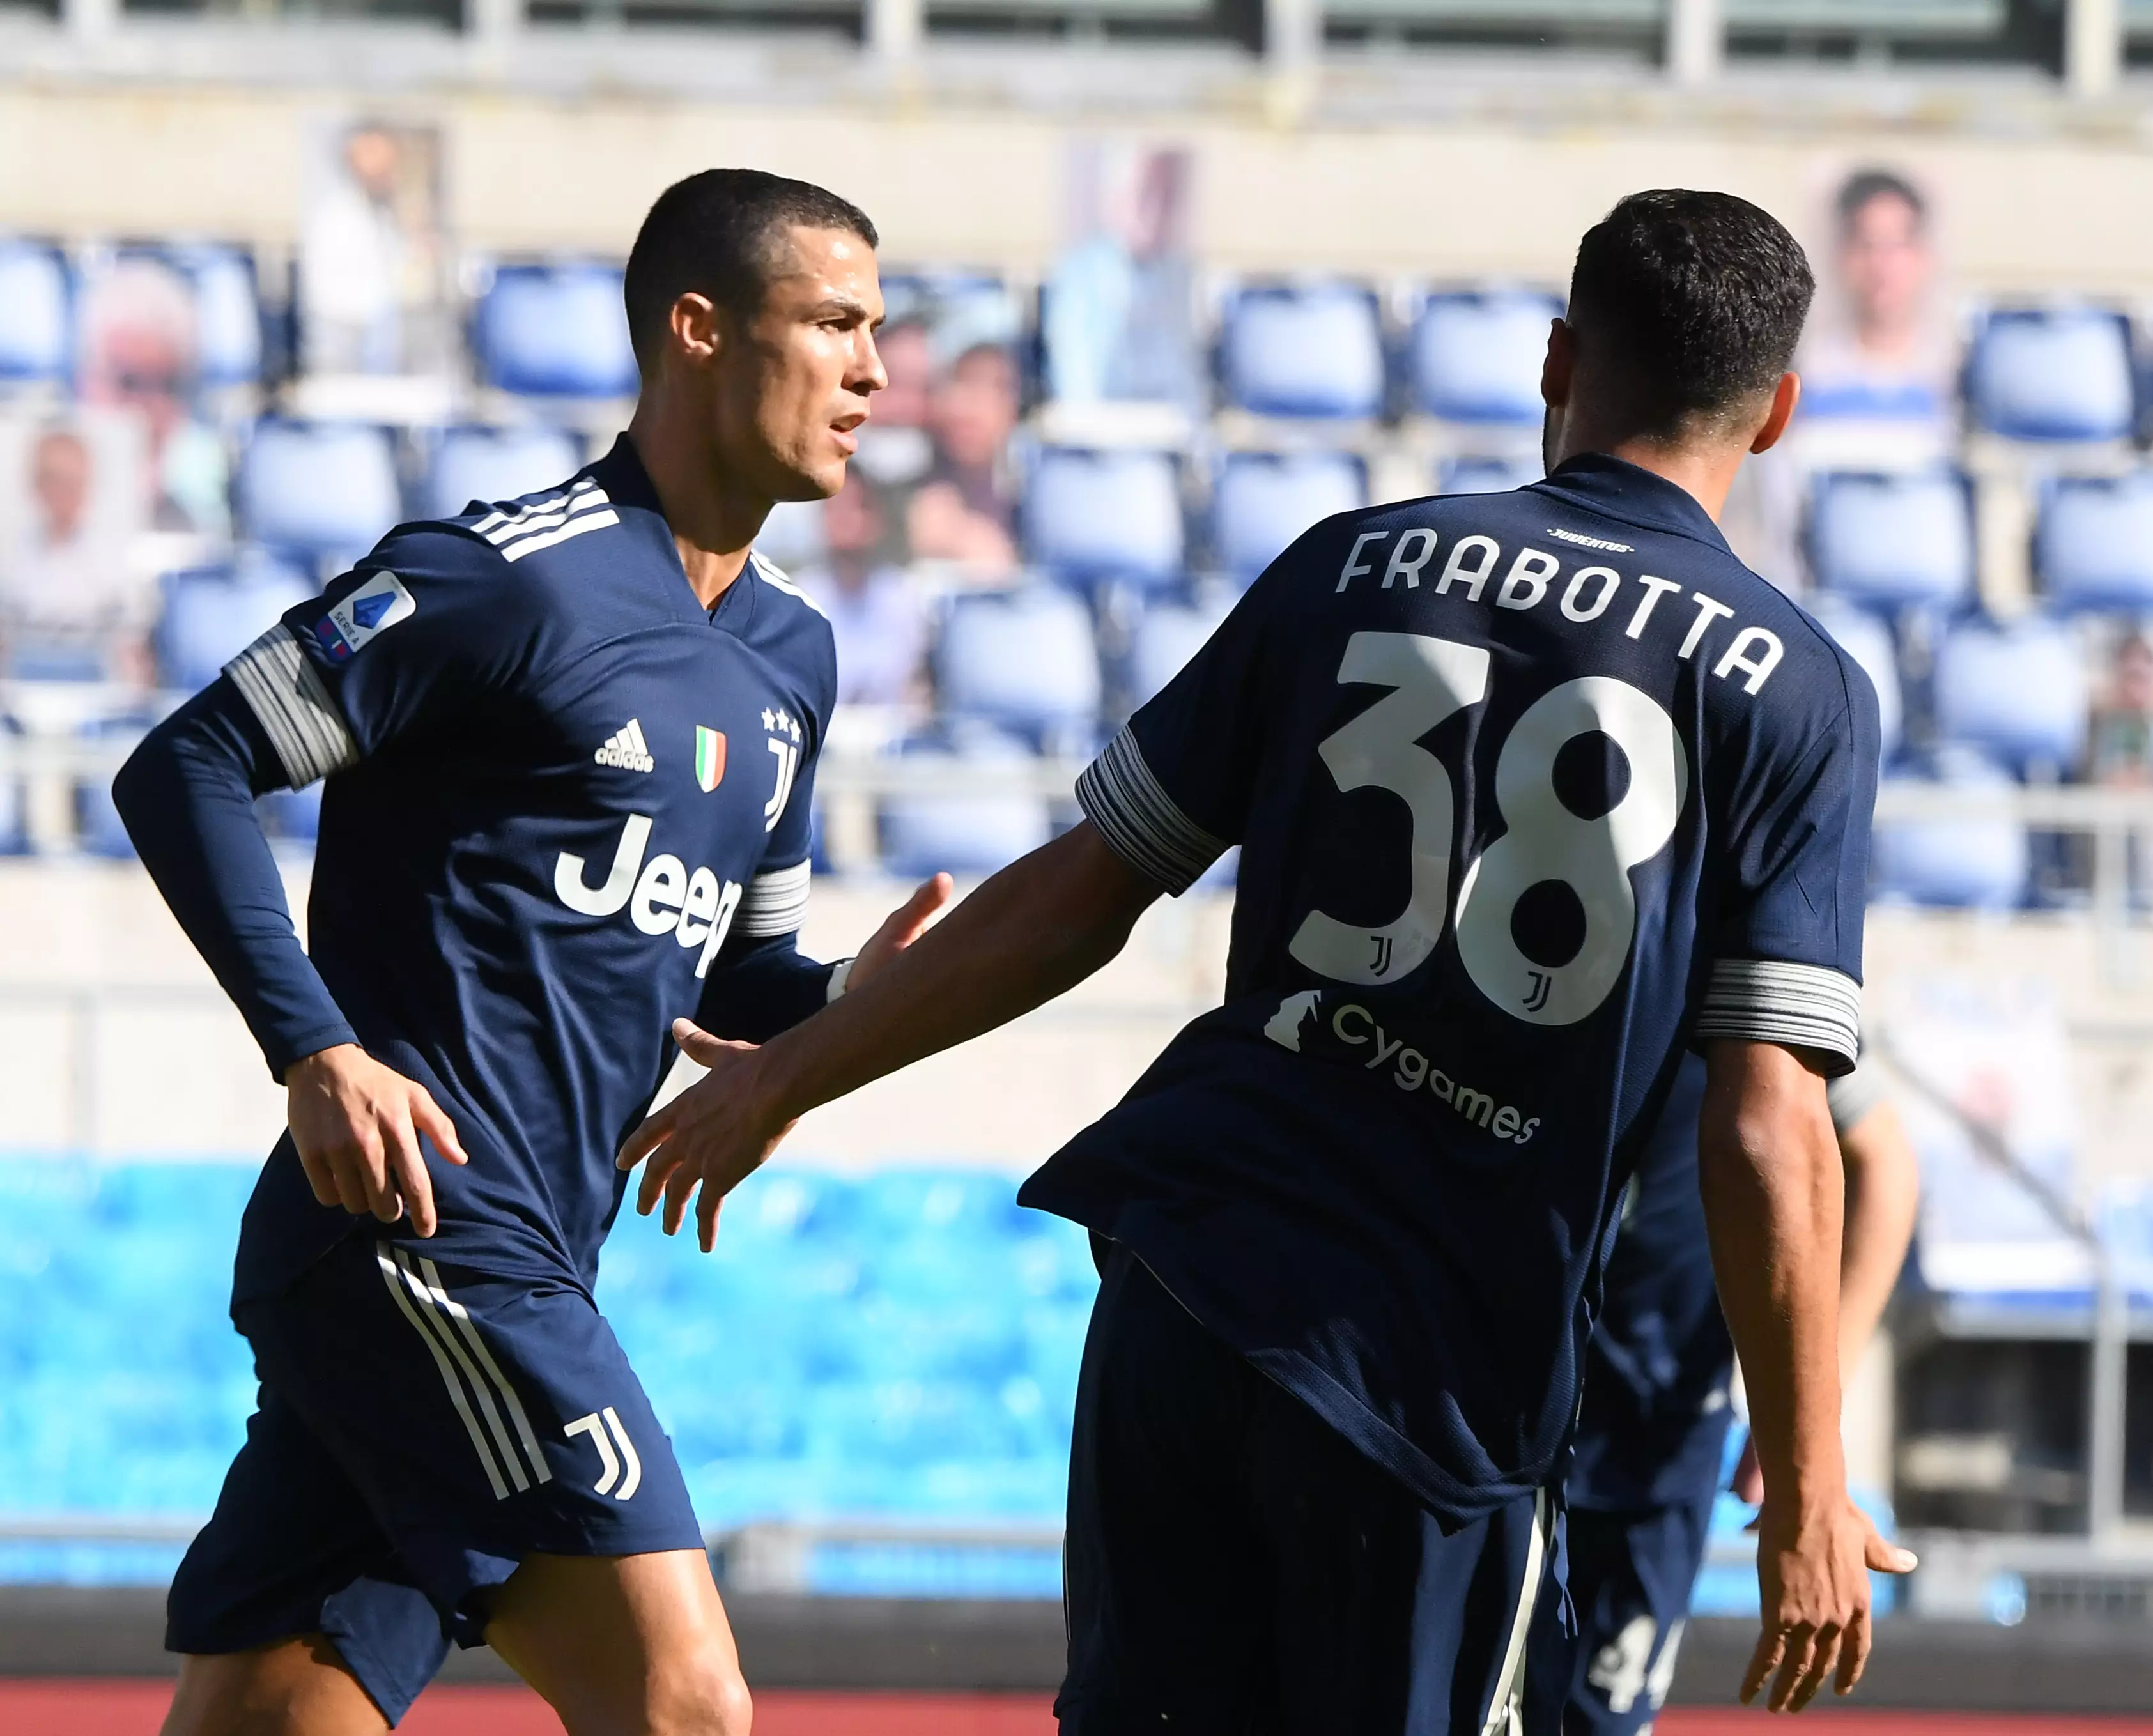 Ronaldo was back scoring for Juventus against Lazio at the weekend. Image: PA Images